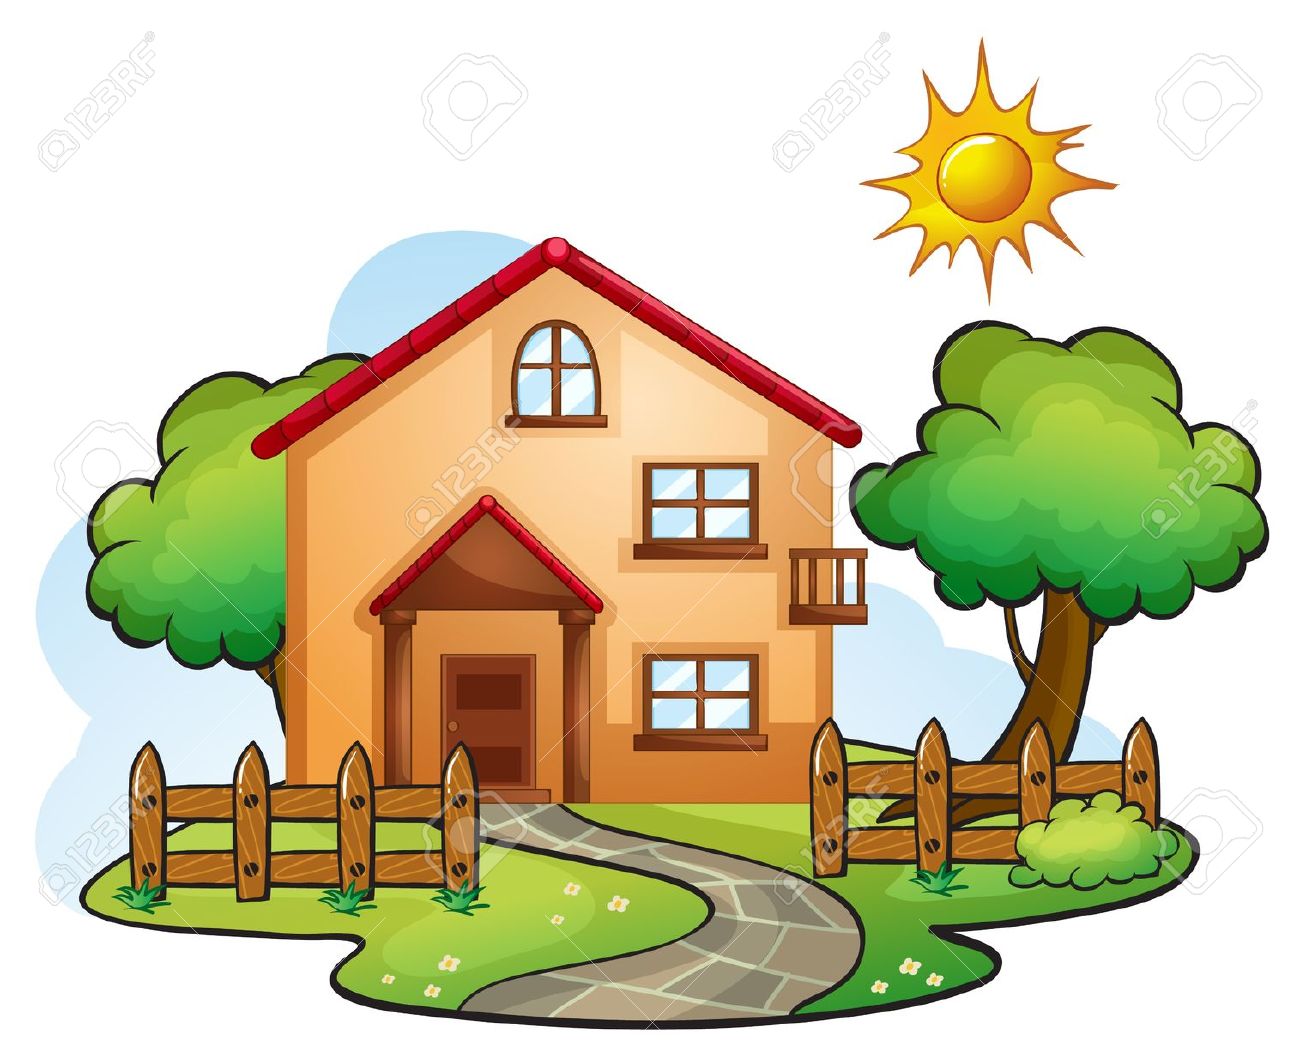 Images of a house. Home clipart scenery